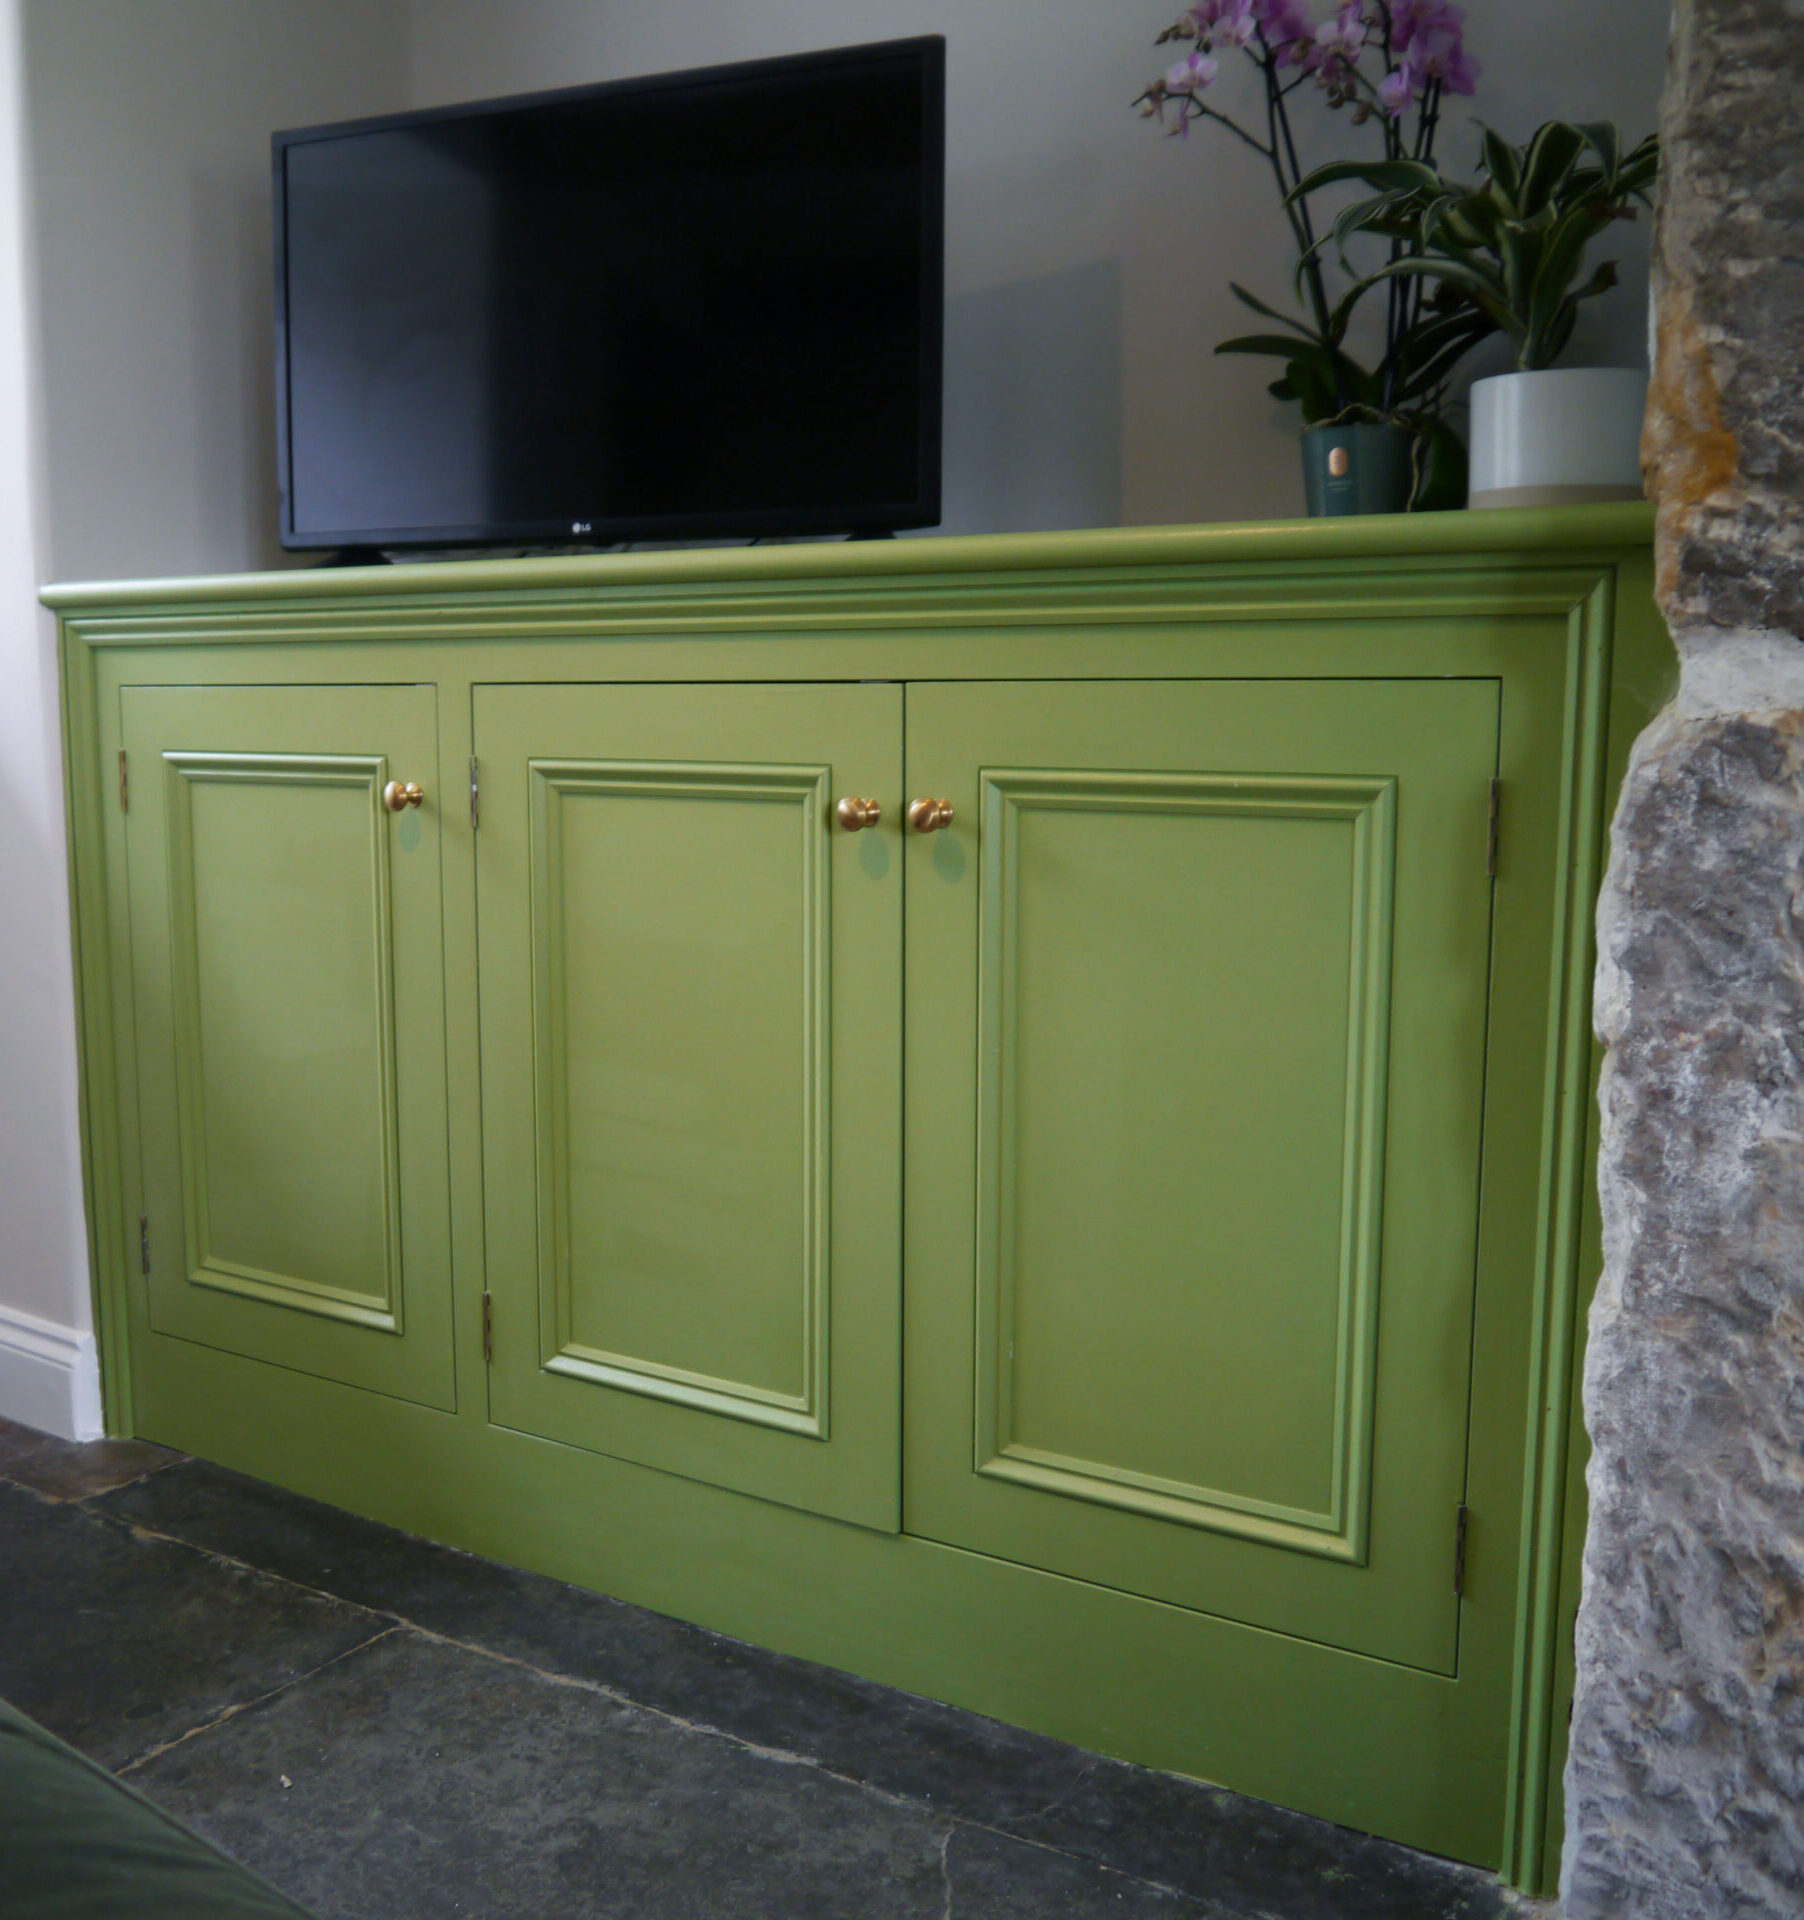 Bespoke green timber TV unit by Kings Stag Joinery